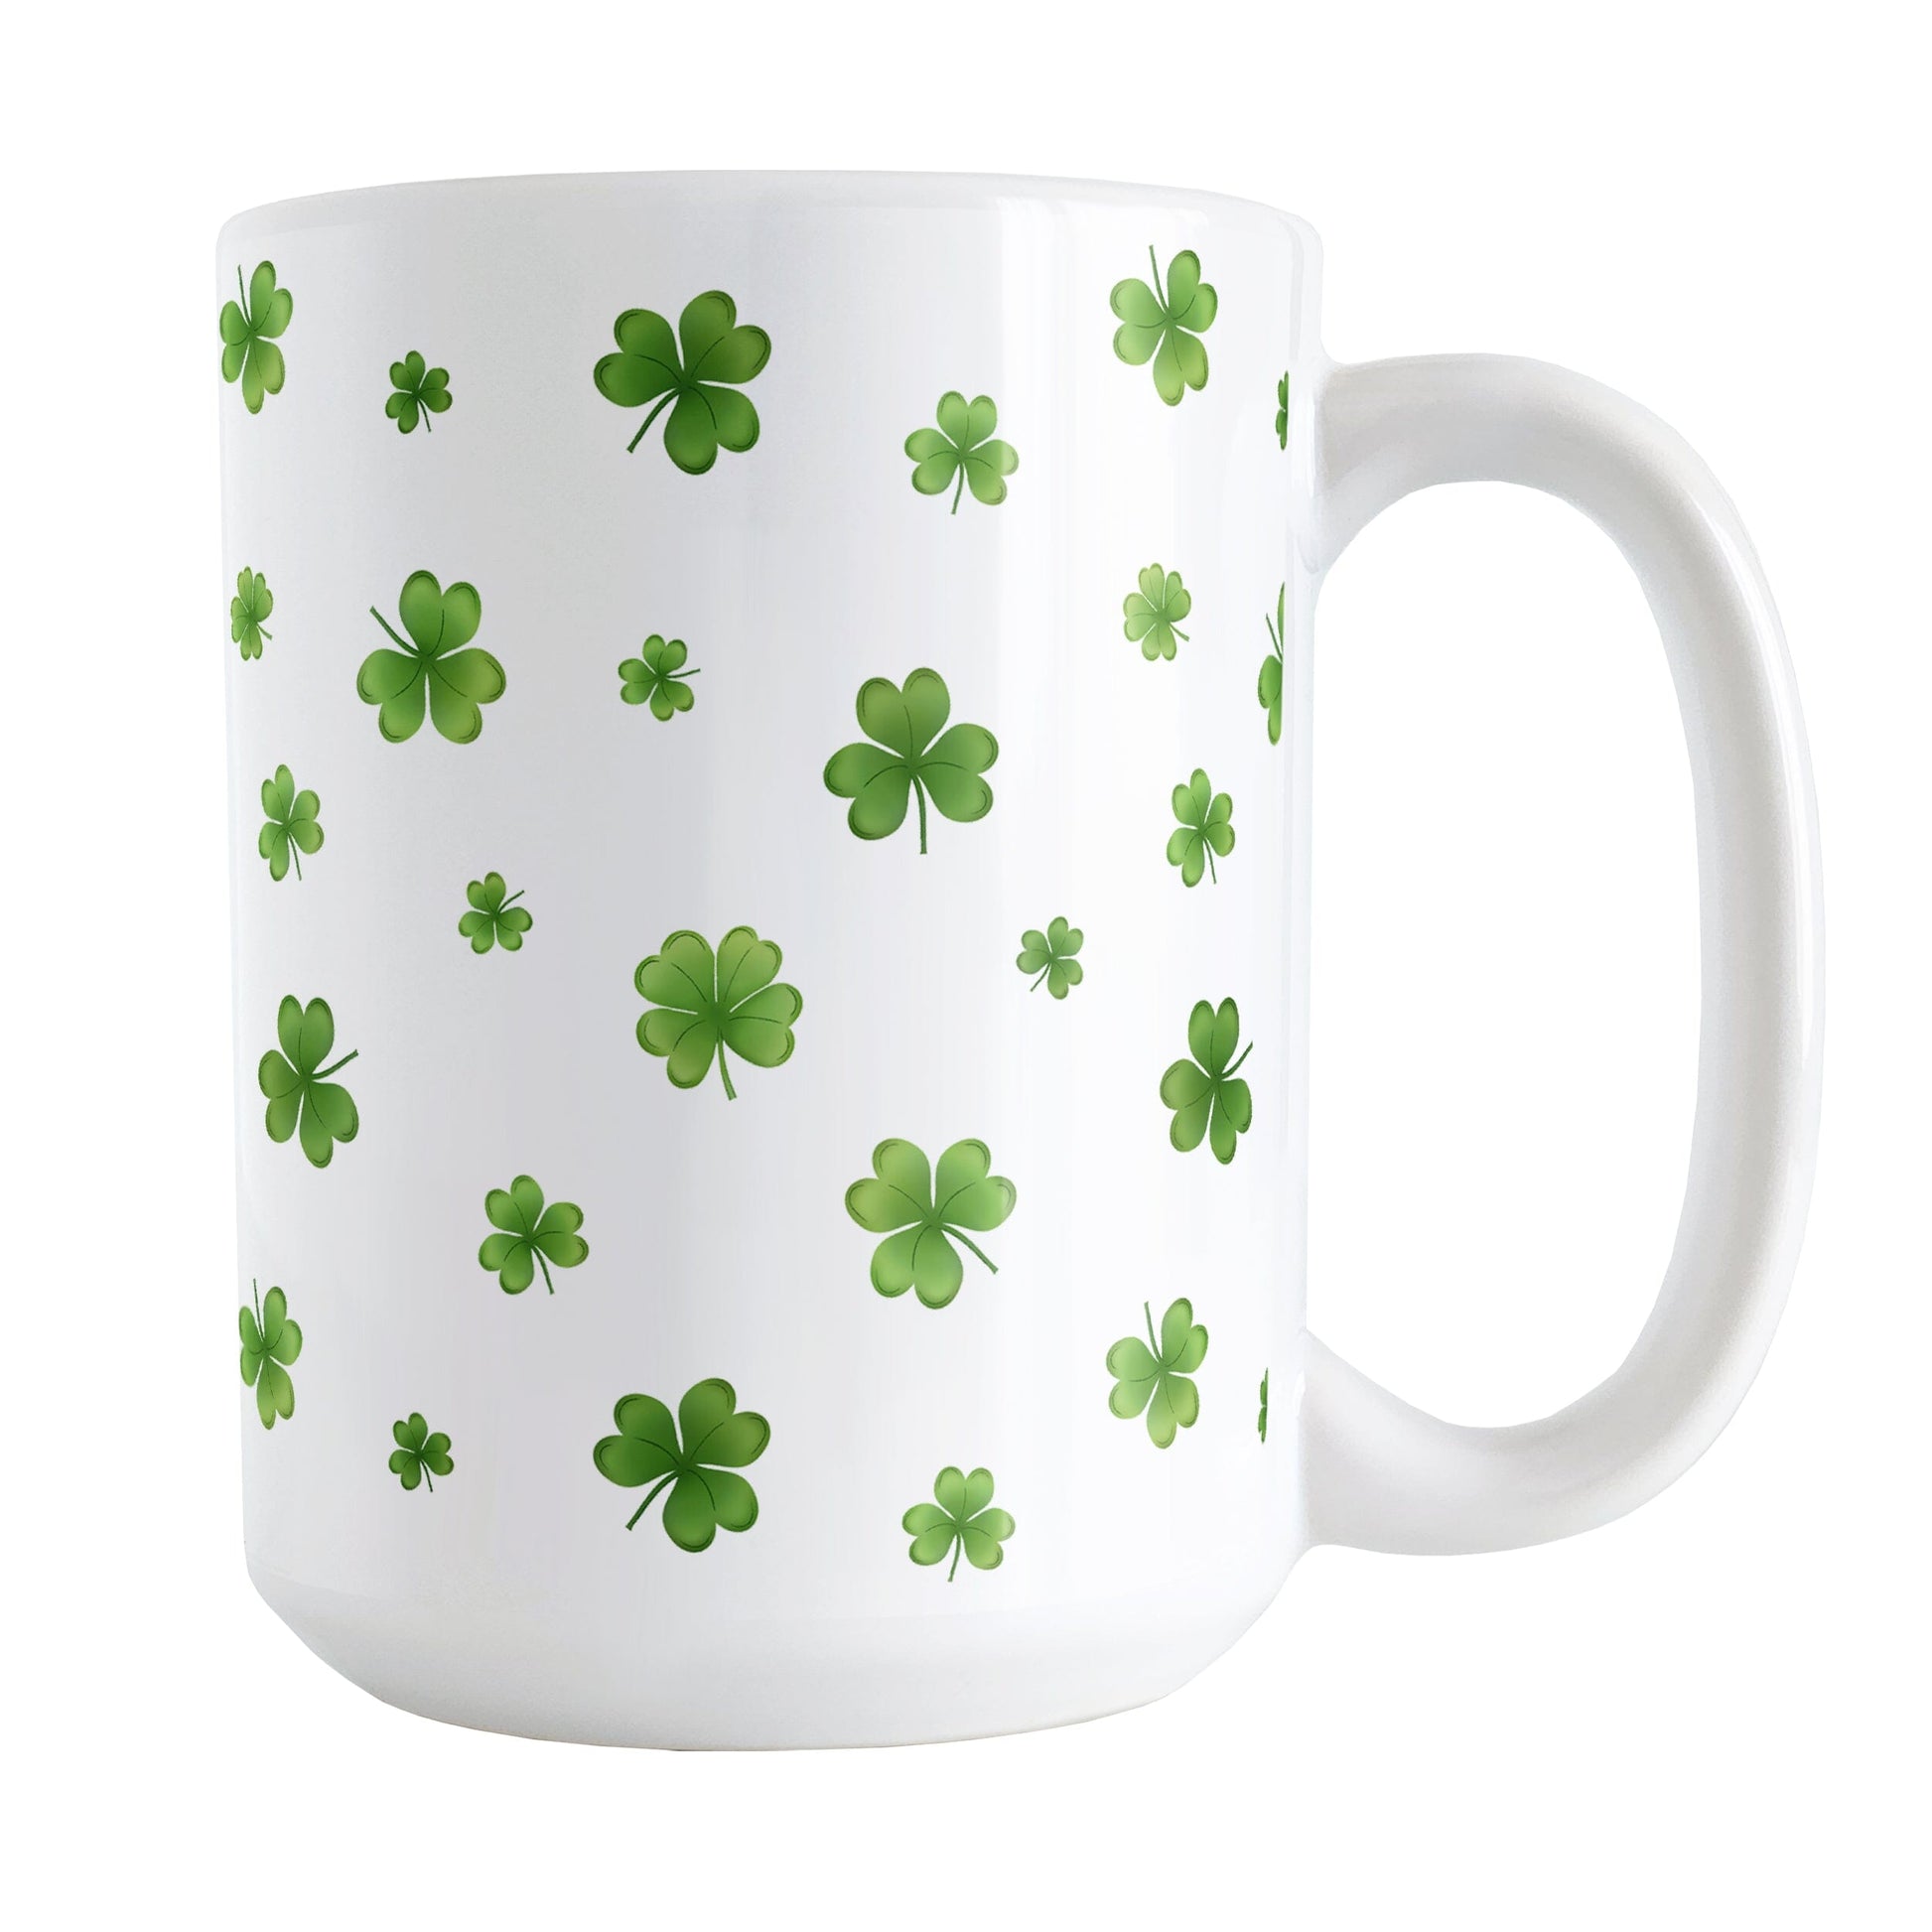 Dainty Shamrocks and Clovers Mug (15oz) at Amy's Coffee Mugs. A ceramic coffee mug designed with hand-drawn green shamrocks and 4-leaf clovers in a dainty minimalist pattern that wraps around the mug up to the handle.